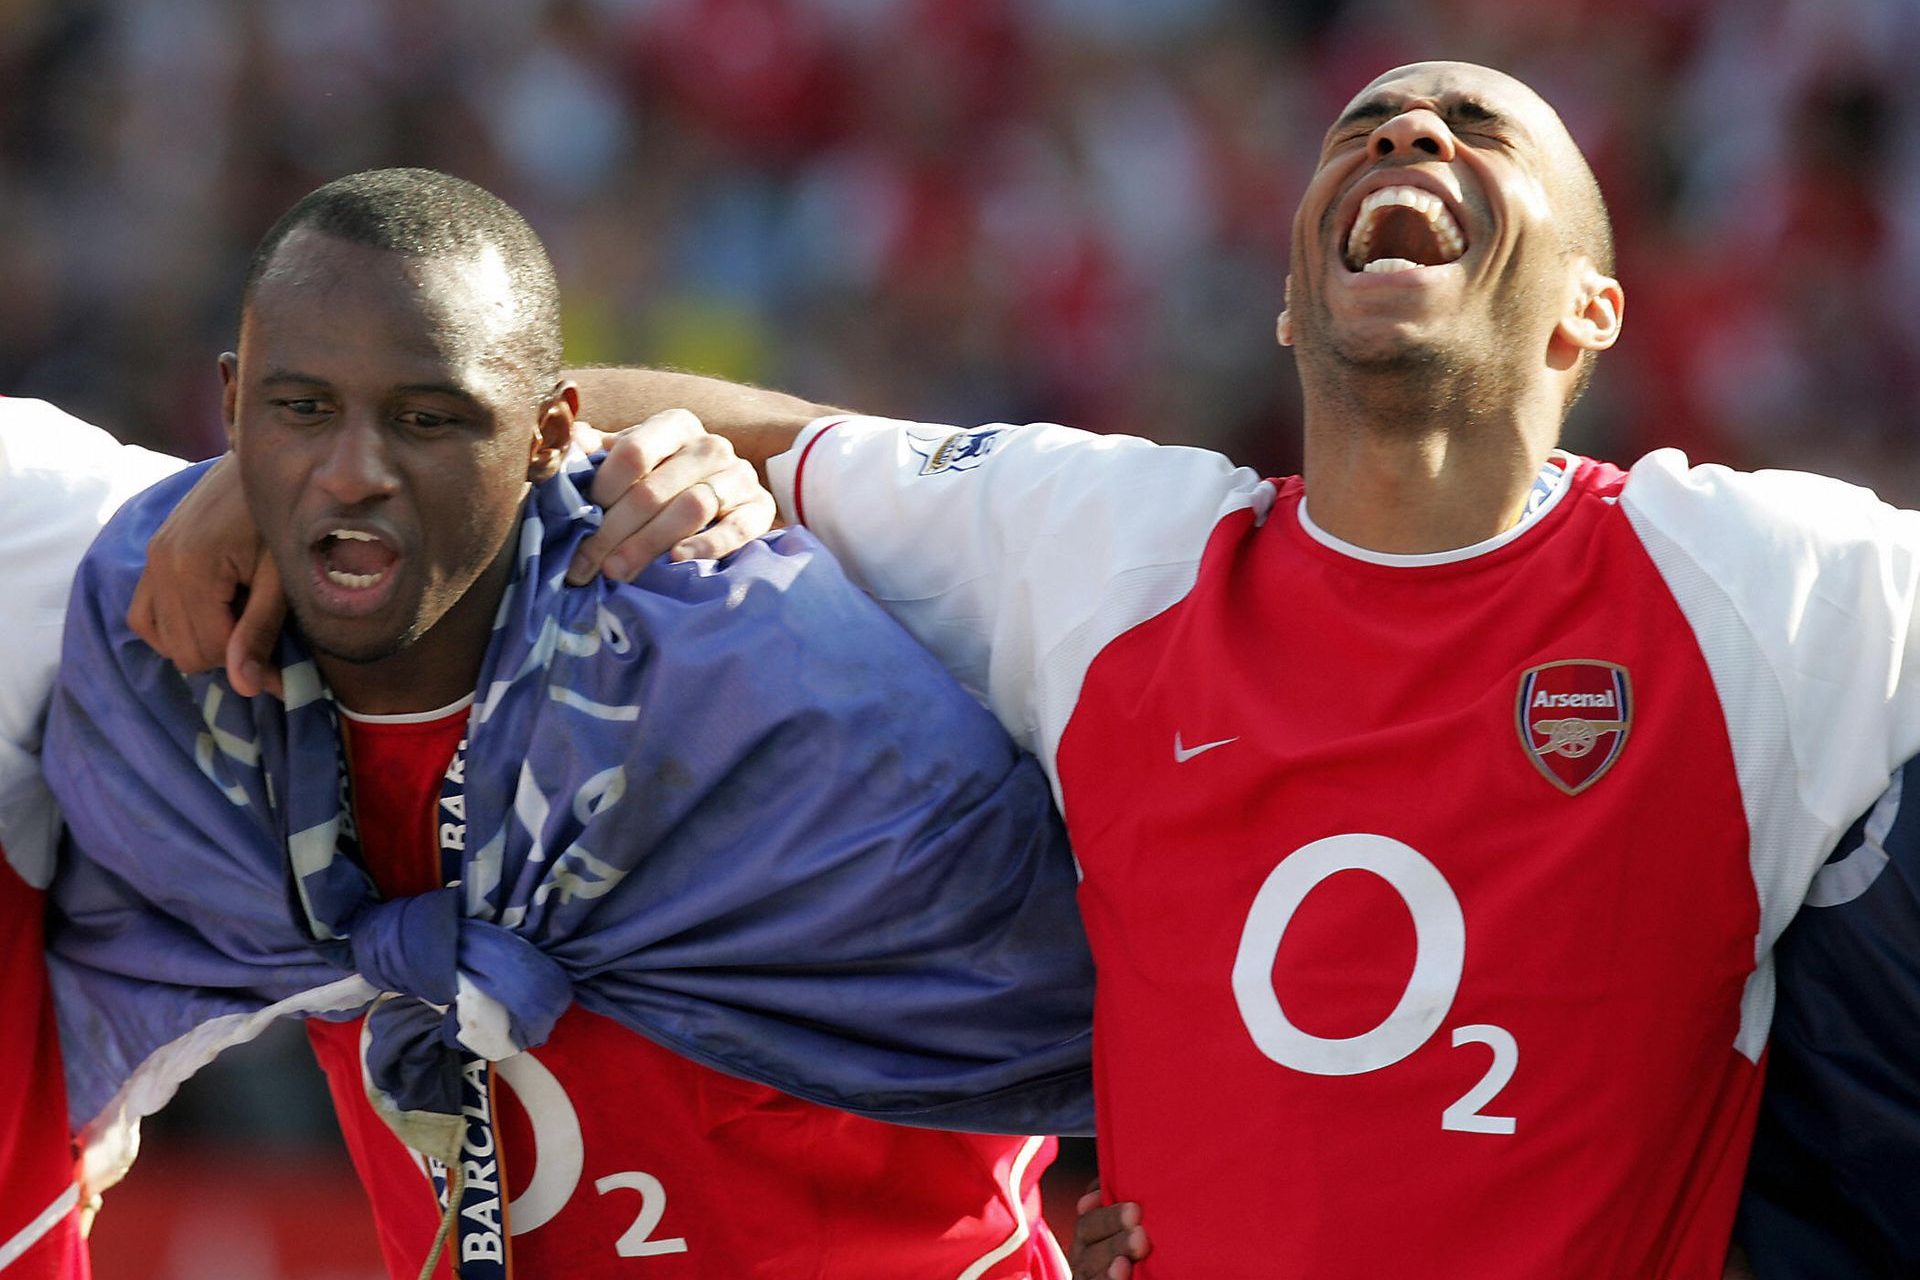 Ranking the top 10 best Premier League players of all time